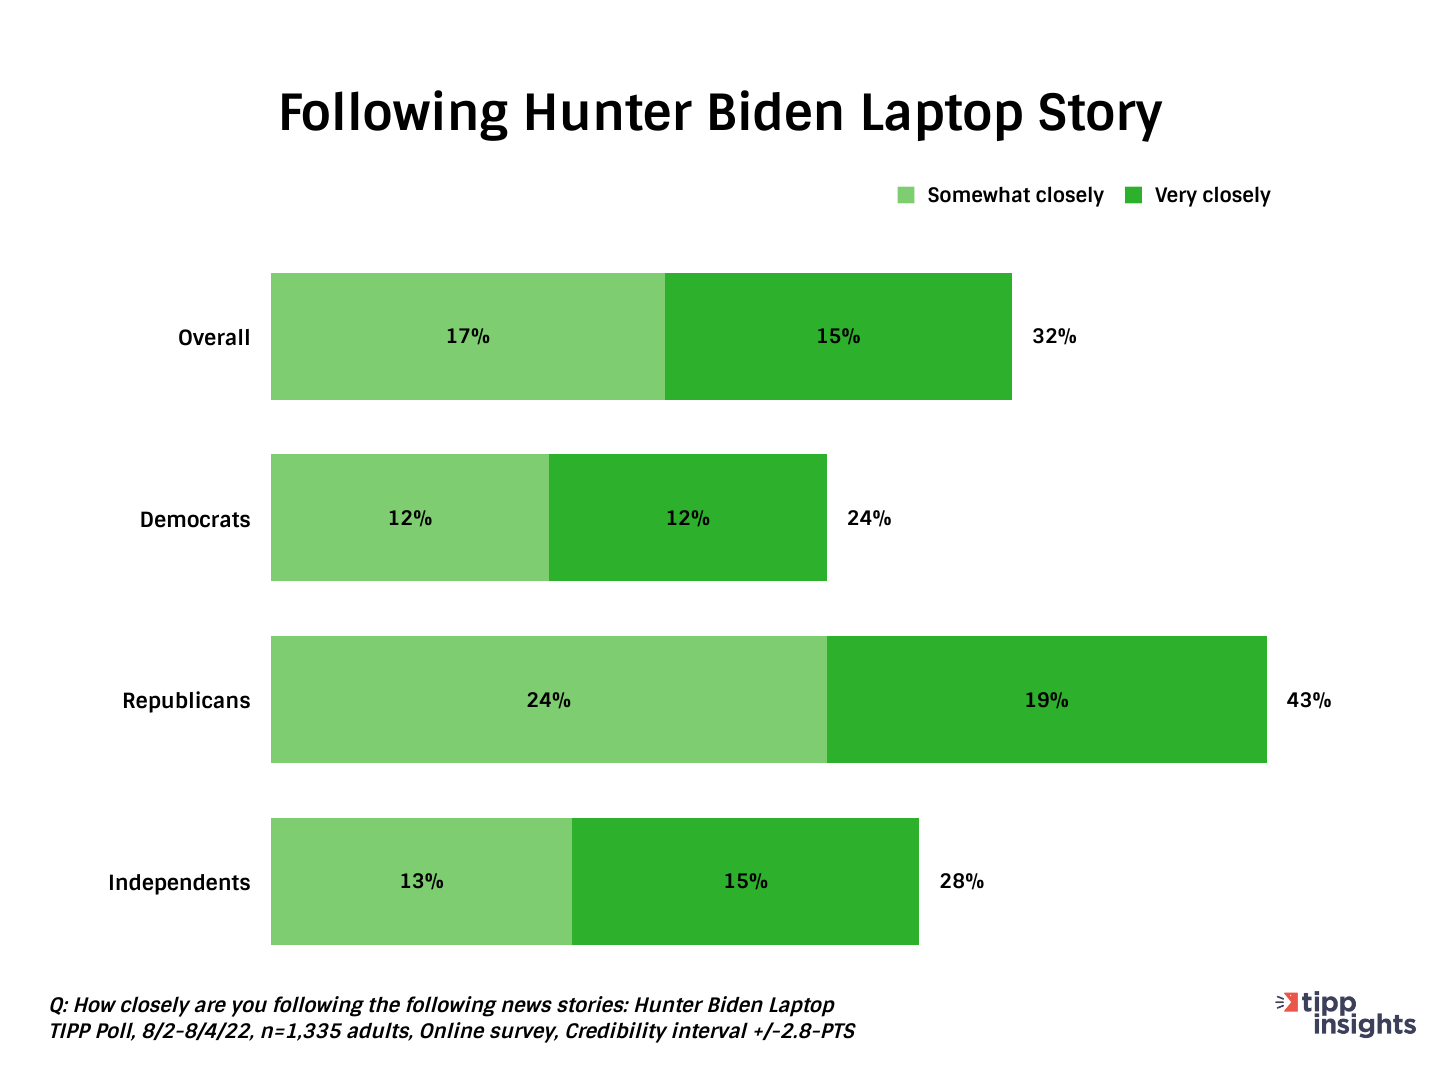 TIPP Poll Results: How closely are Americans following stories on the Hunter Biden laptop